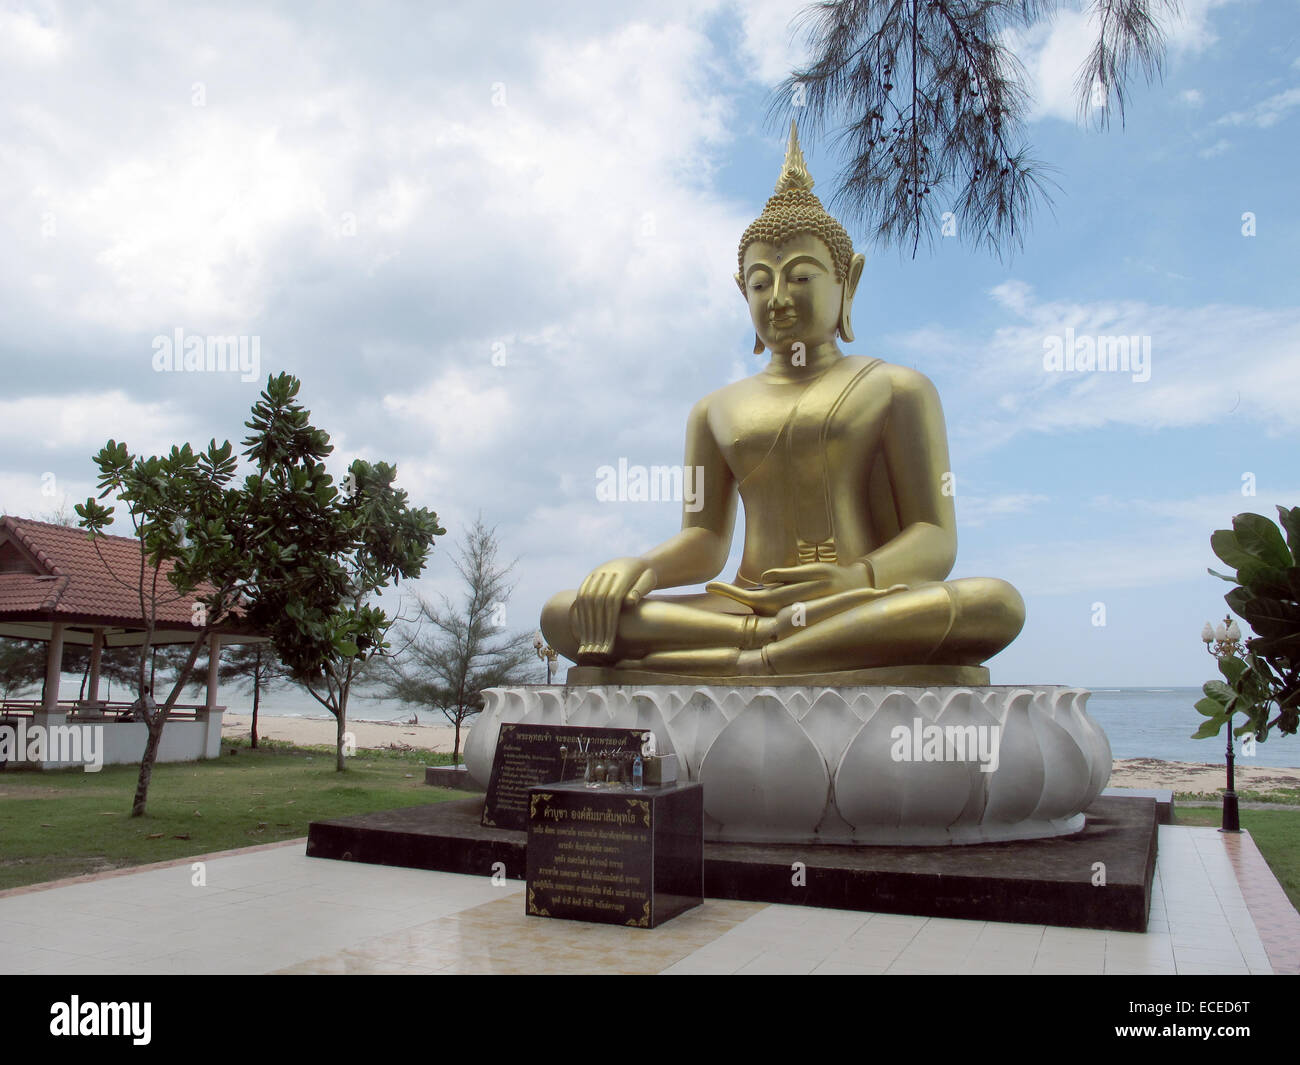 A large Buddha watched over the tsunami monument in Ban Nam Khem, Thailand, 20 November 2014. Relatives have placed tiles there in memory of their loved ones. More than 8,000 people were killed in the region. Photo: CHRISTAINE OELRICH/dpa Stock Photo